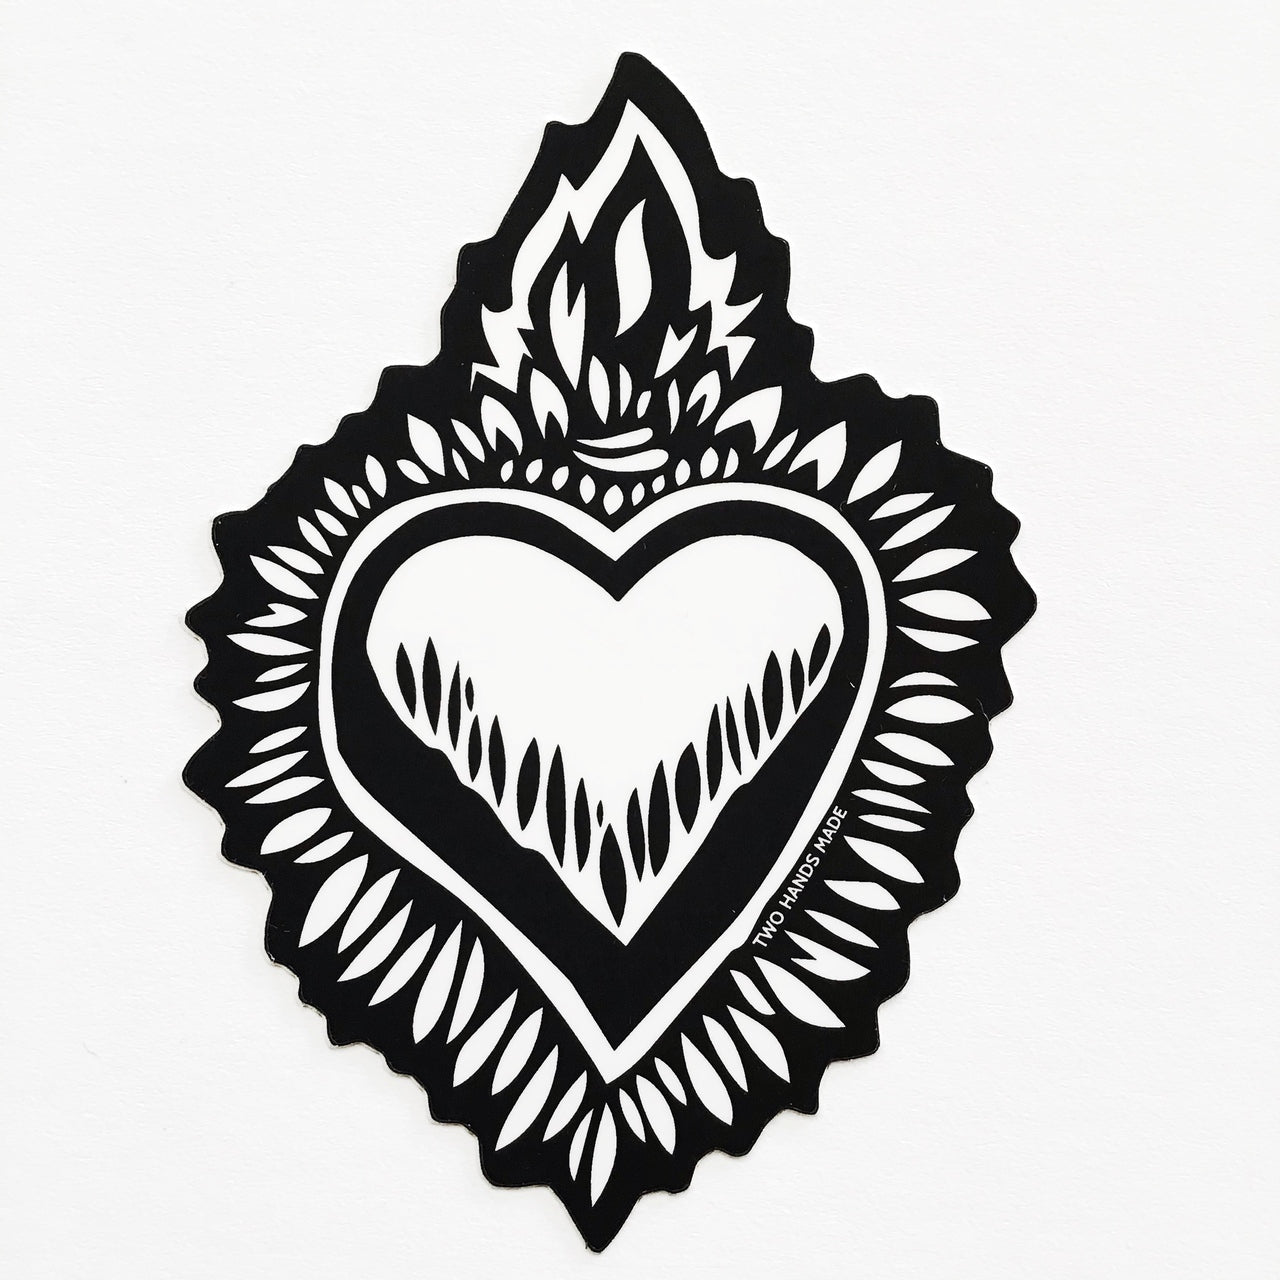 Two Hands Made Milagro Flaming Heart Vinyl Sticker- a heart to compliment any surface.